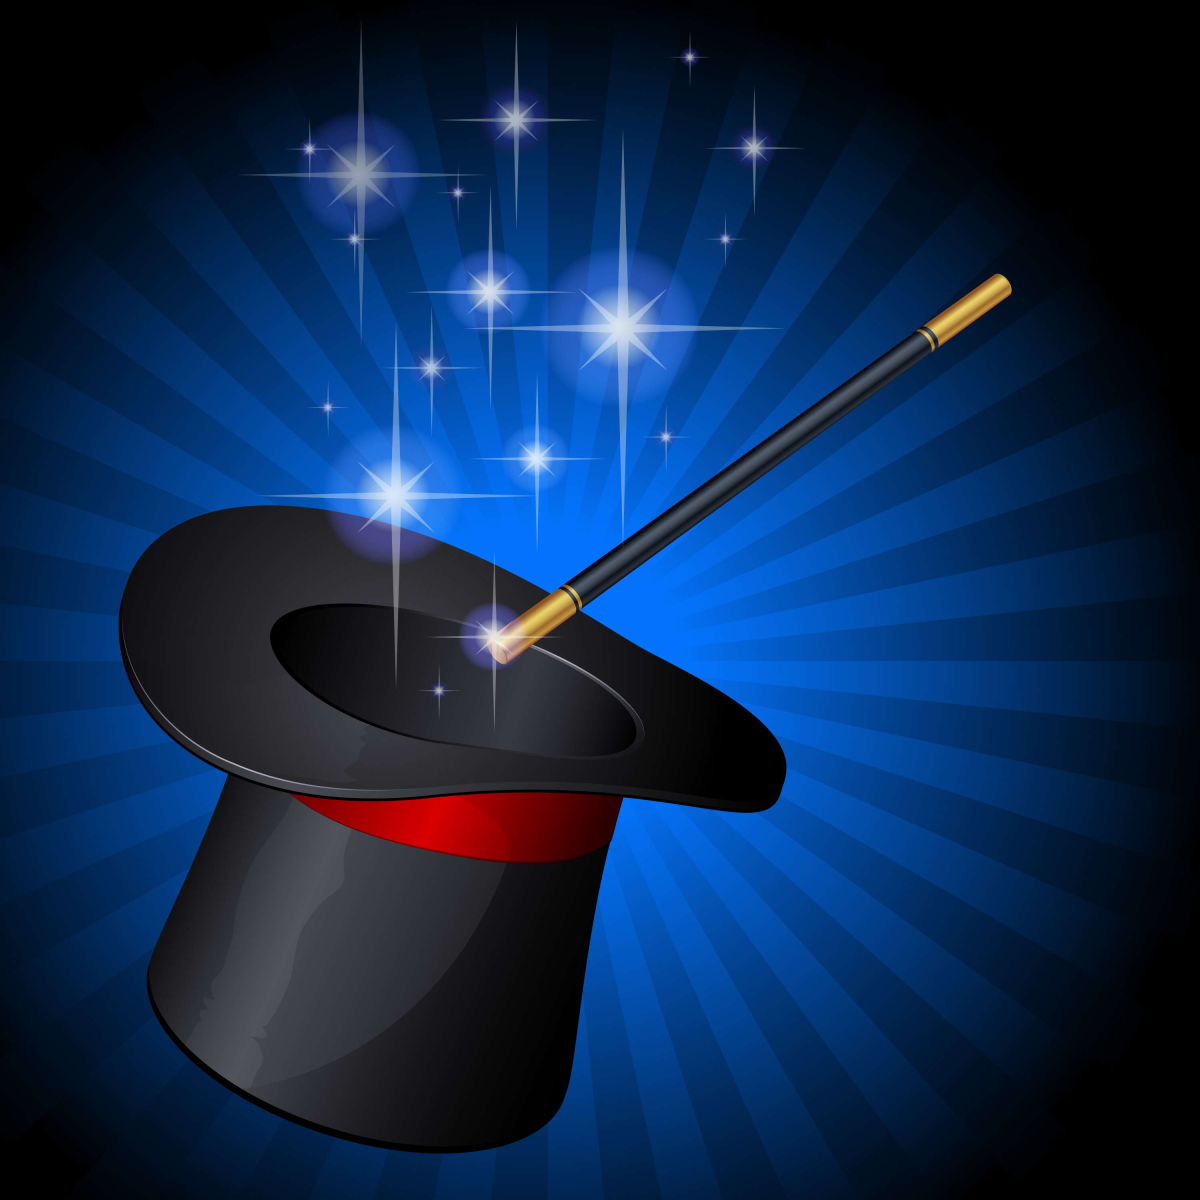 A graphic featuring a magician's top hat and wand.